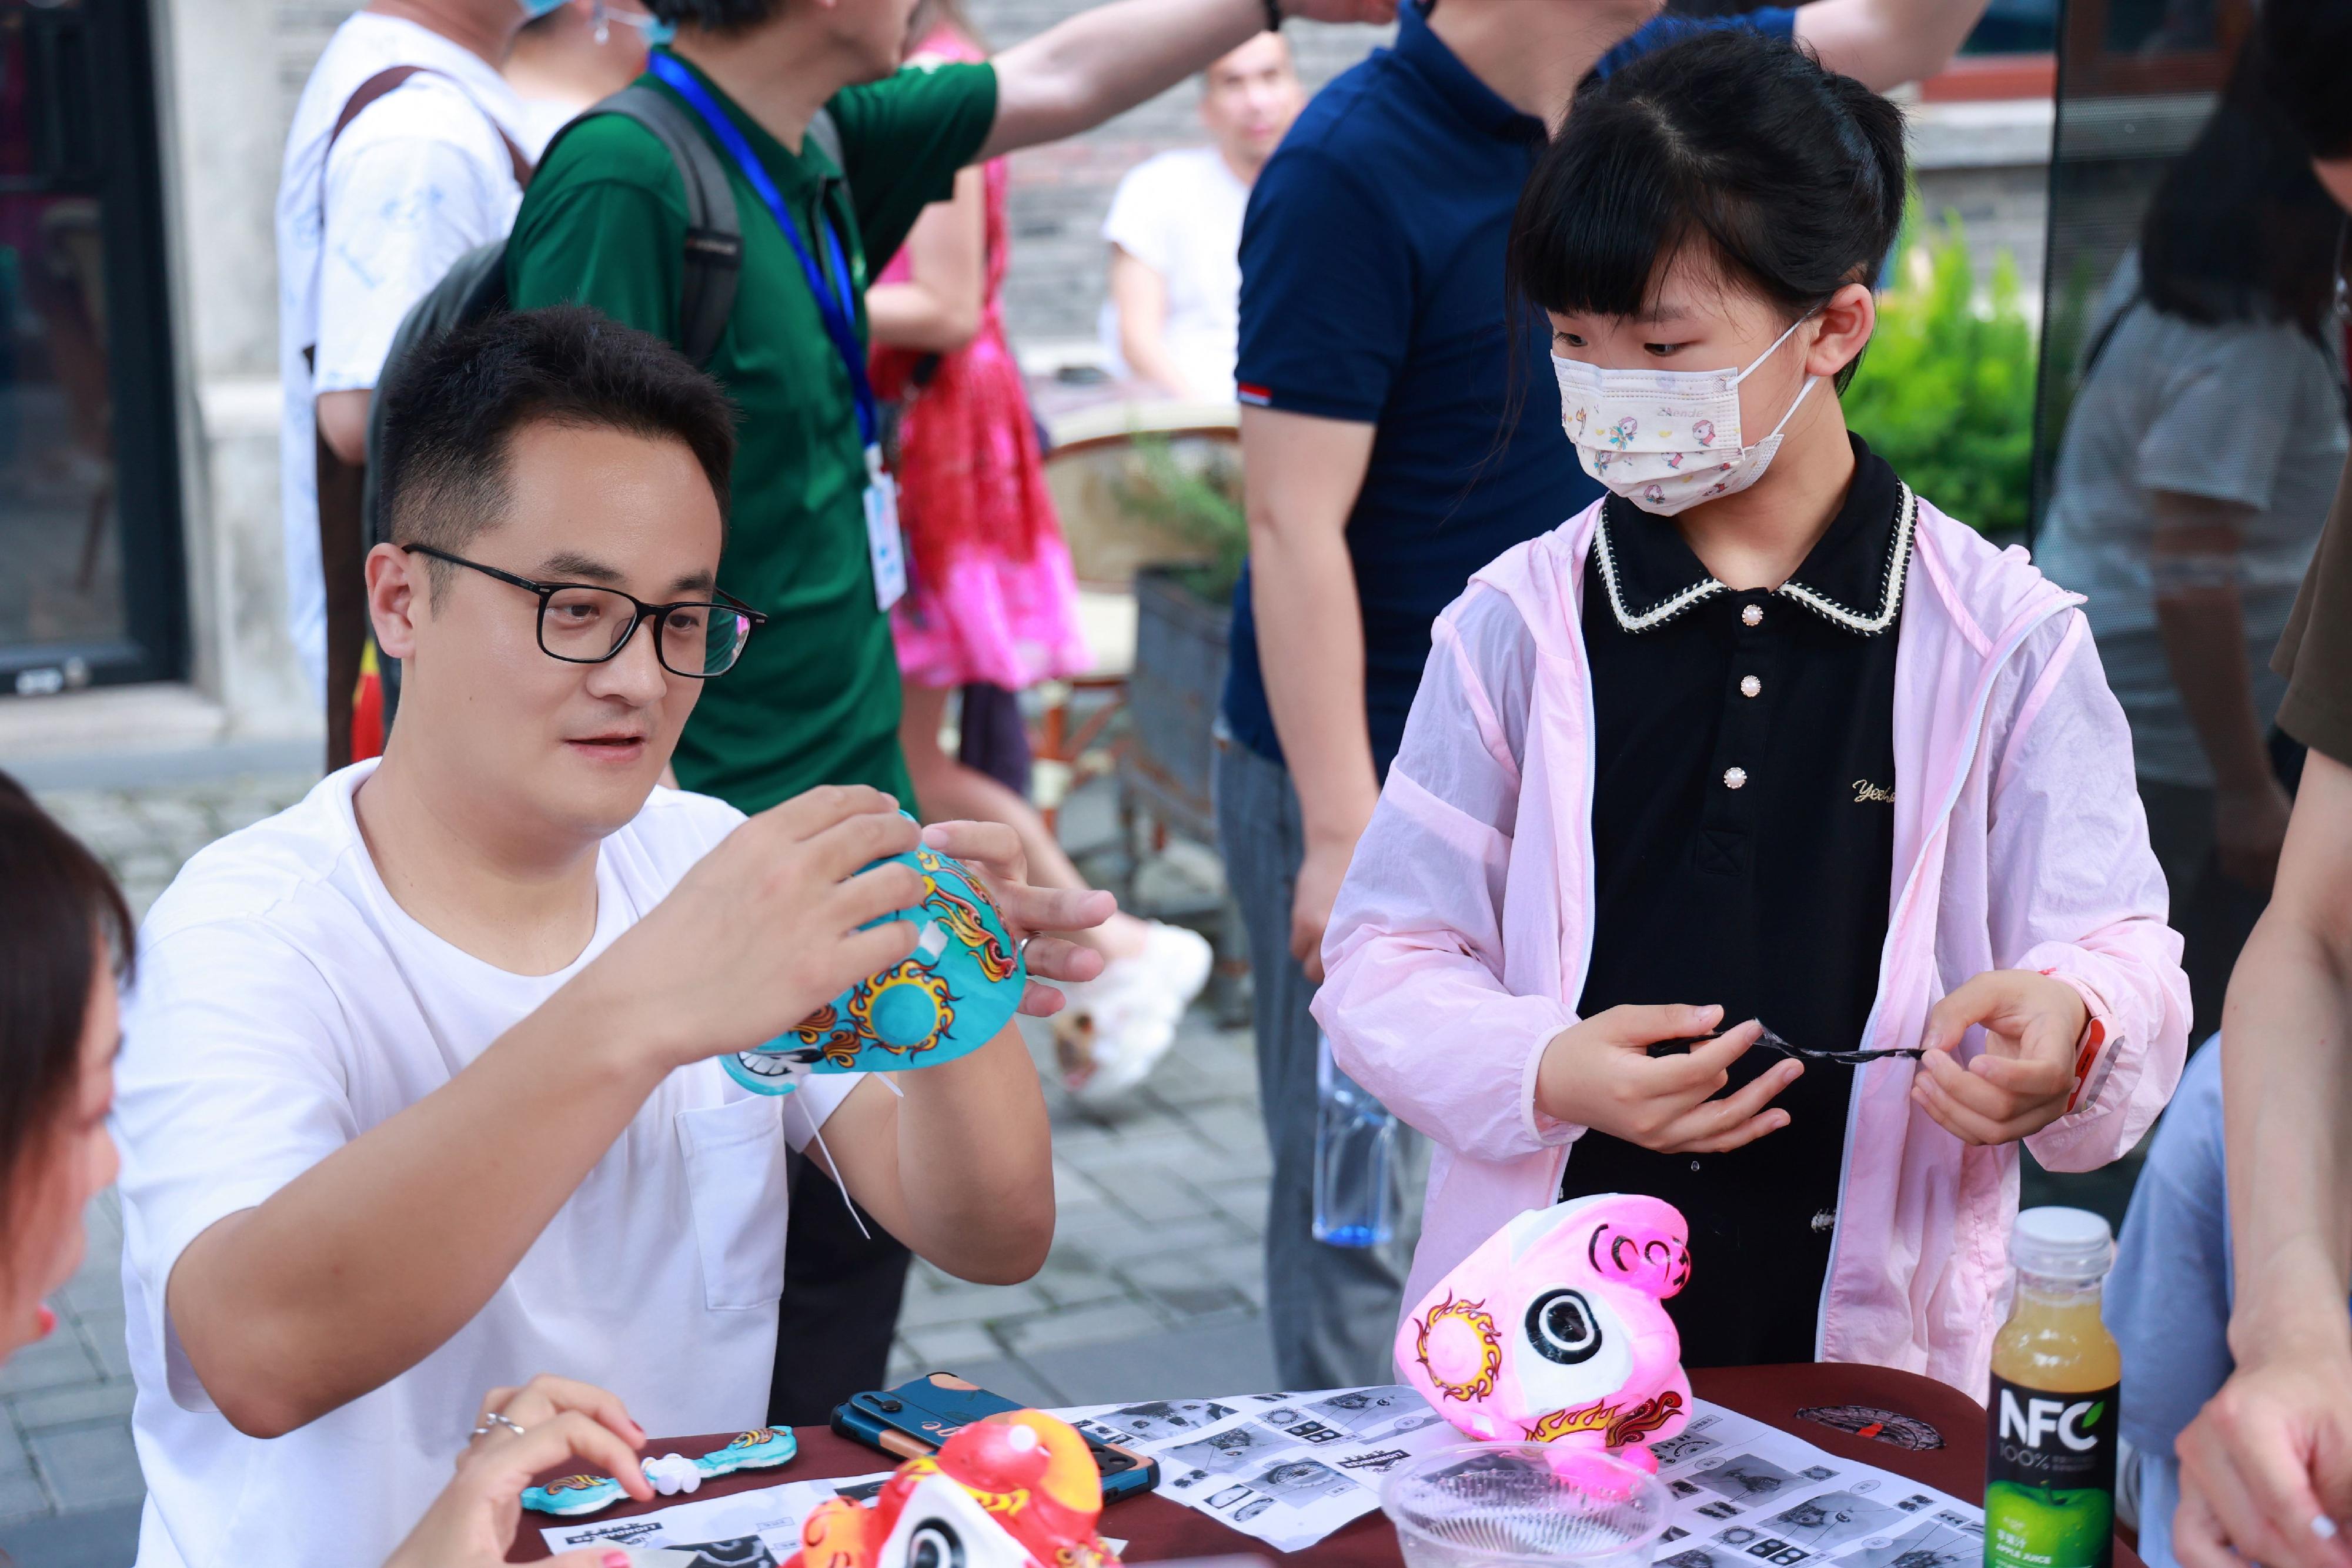 To celebrate the 26th anniversary of Hong Kong's return to the motherland, the Hong Kong Economic and Trade Office in Shanghai unveiled a series of celebratory events today (July 1) in Shanghai. Photo shows citizens participating in a workshop on lion dance head-making.